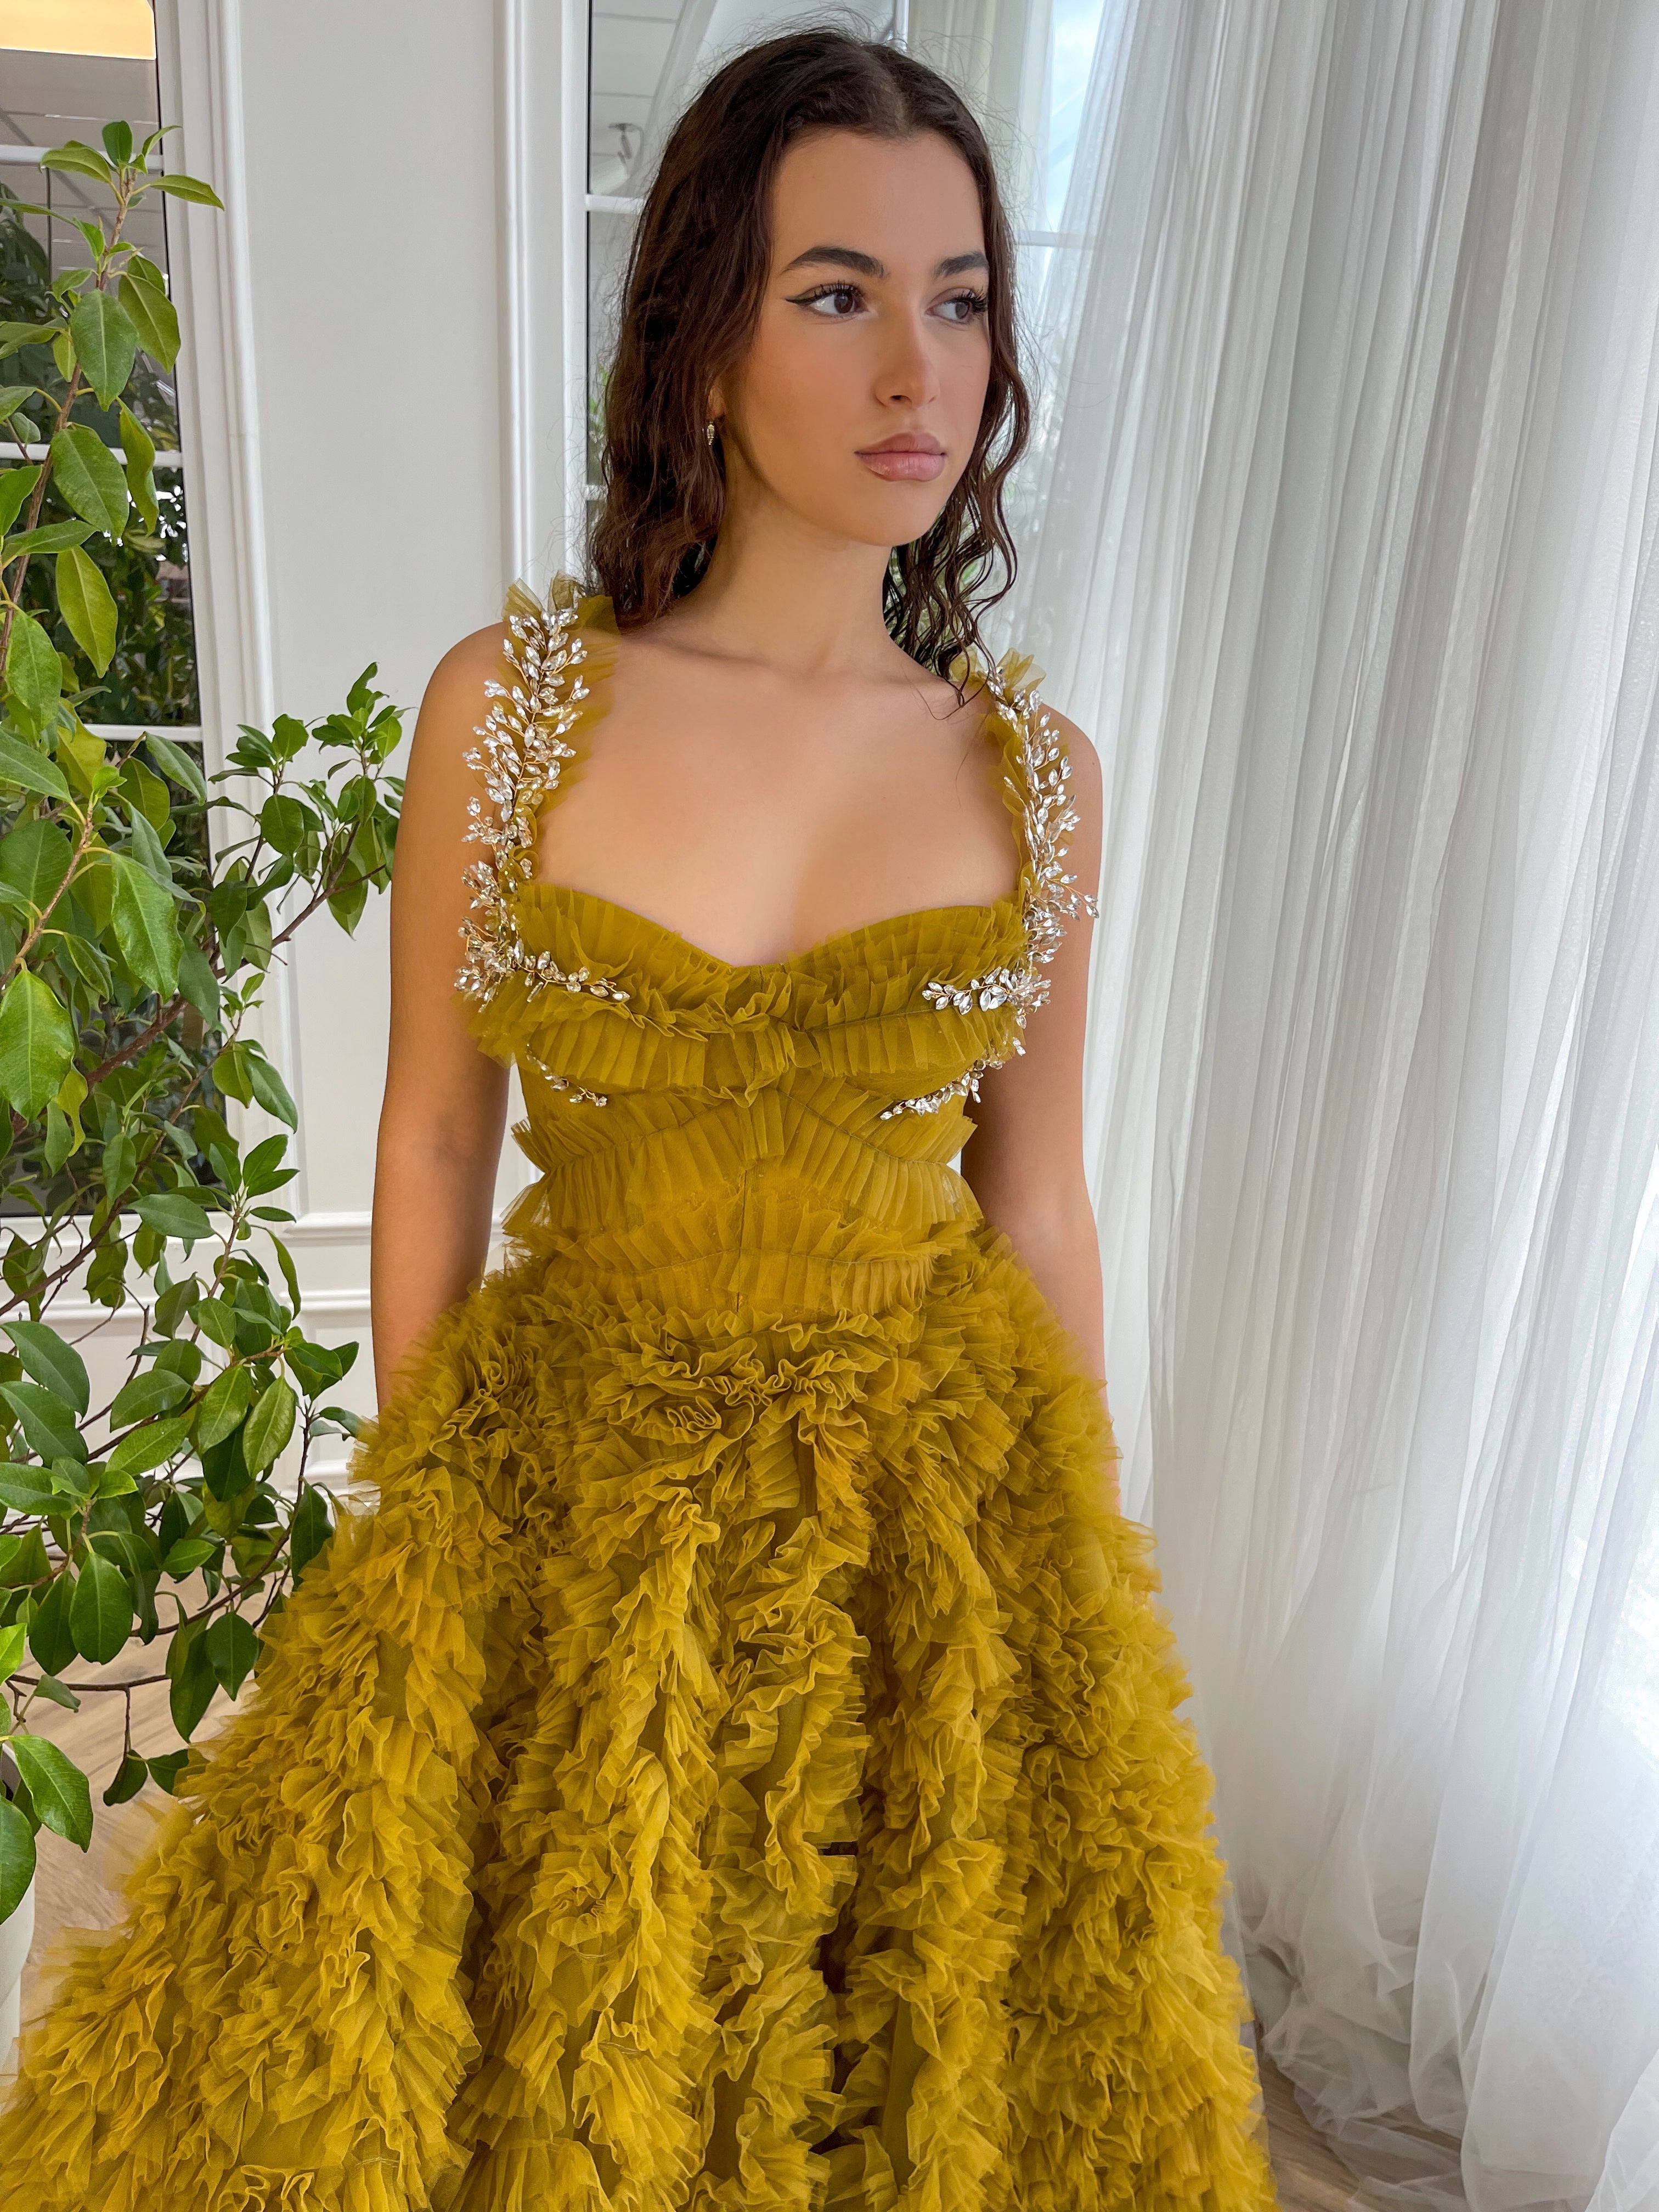 Gold A-Line dress with ruffles, embroidery and spaghetti straps